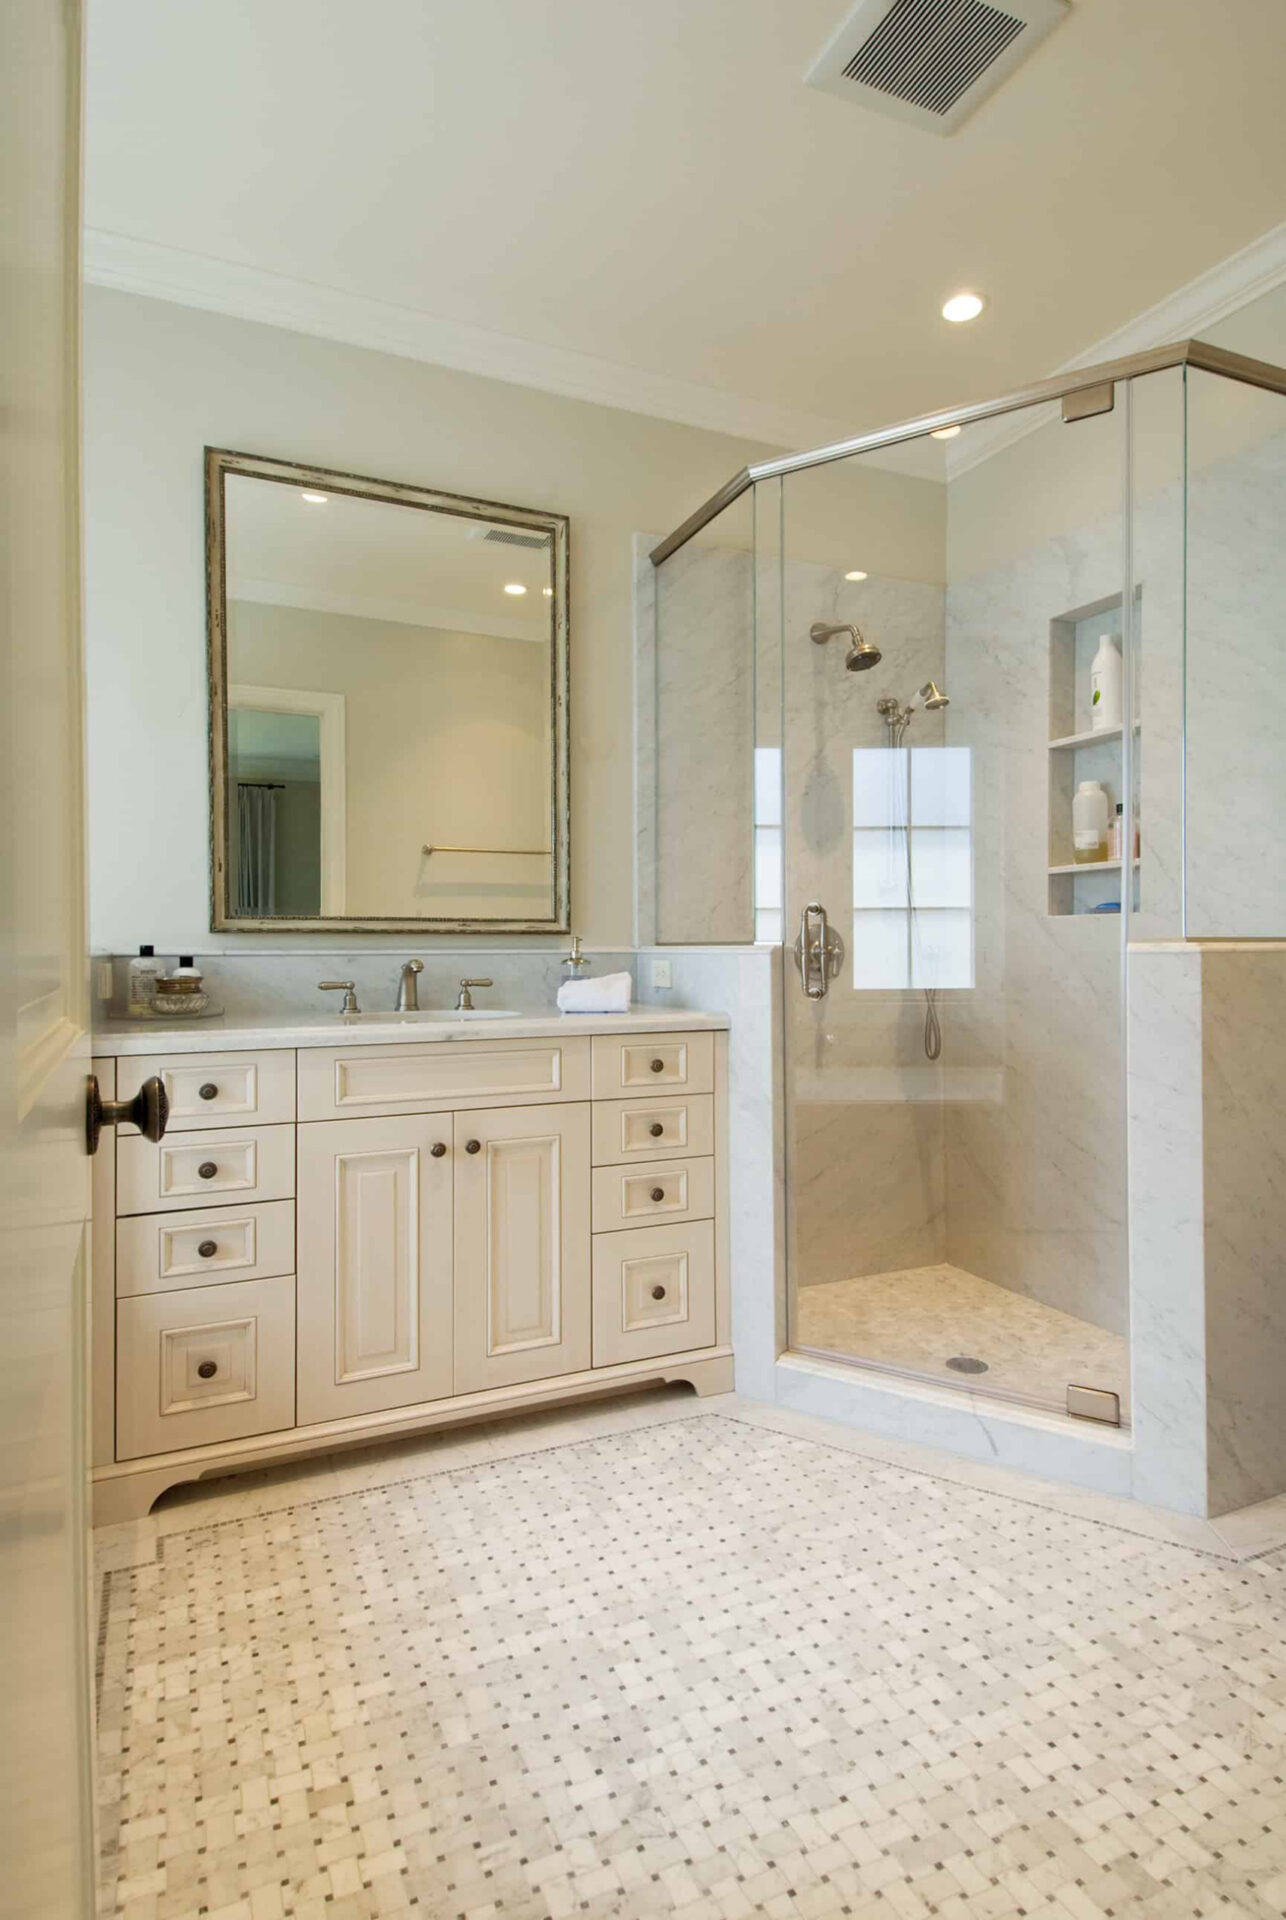 Beautiful neutral color bathroom with tiled floor and glass enclosed shower.